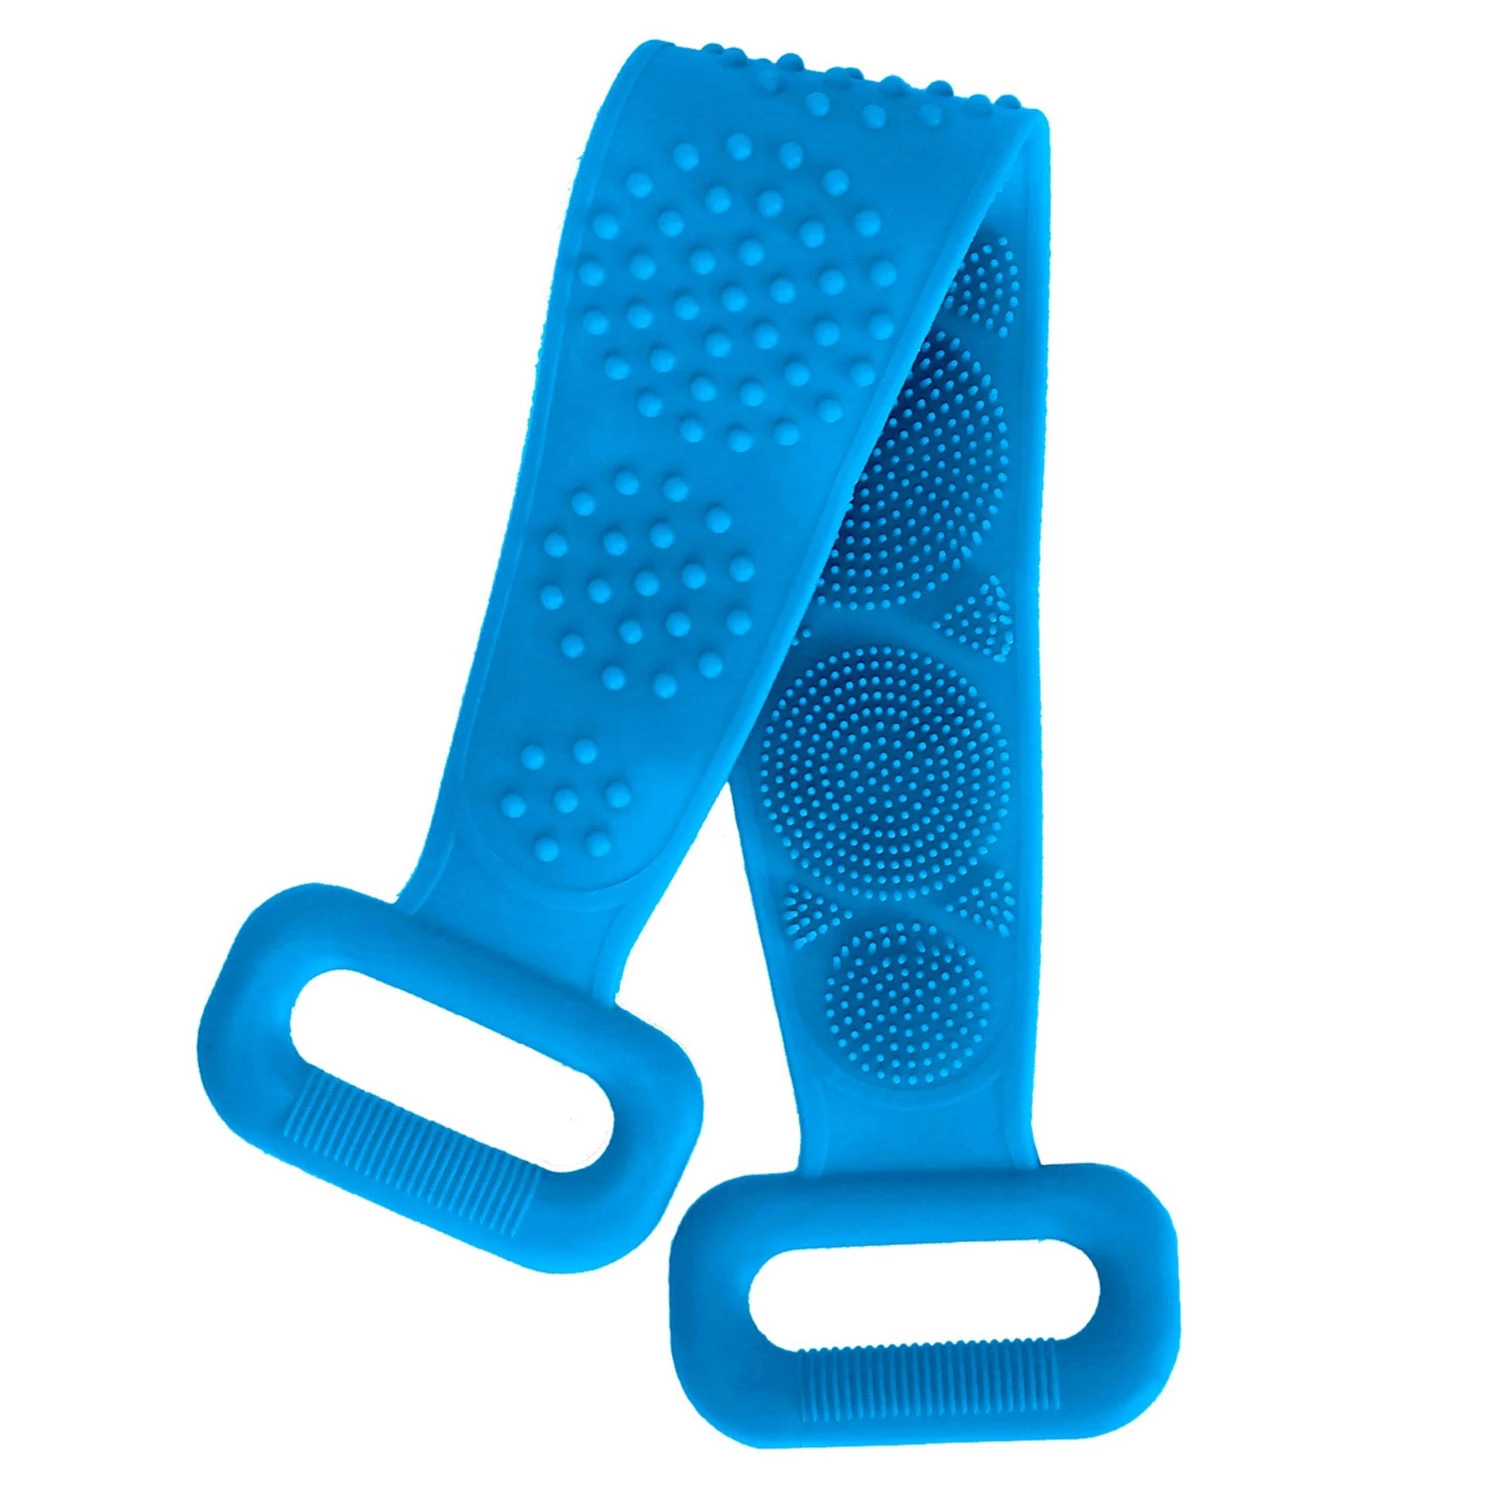 Exfoliating Silicone Body Scrubber Belt with Massage Dots - Shower Strap Brush with Adhesive Hook